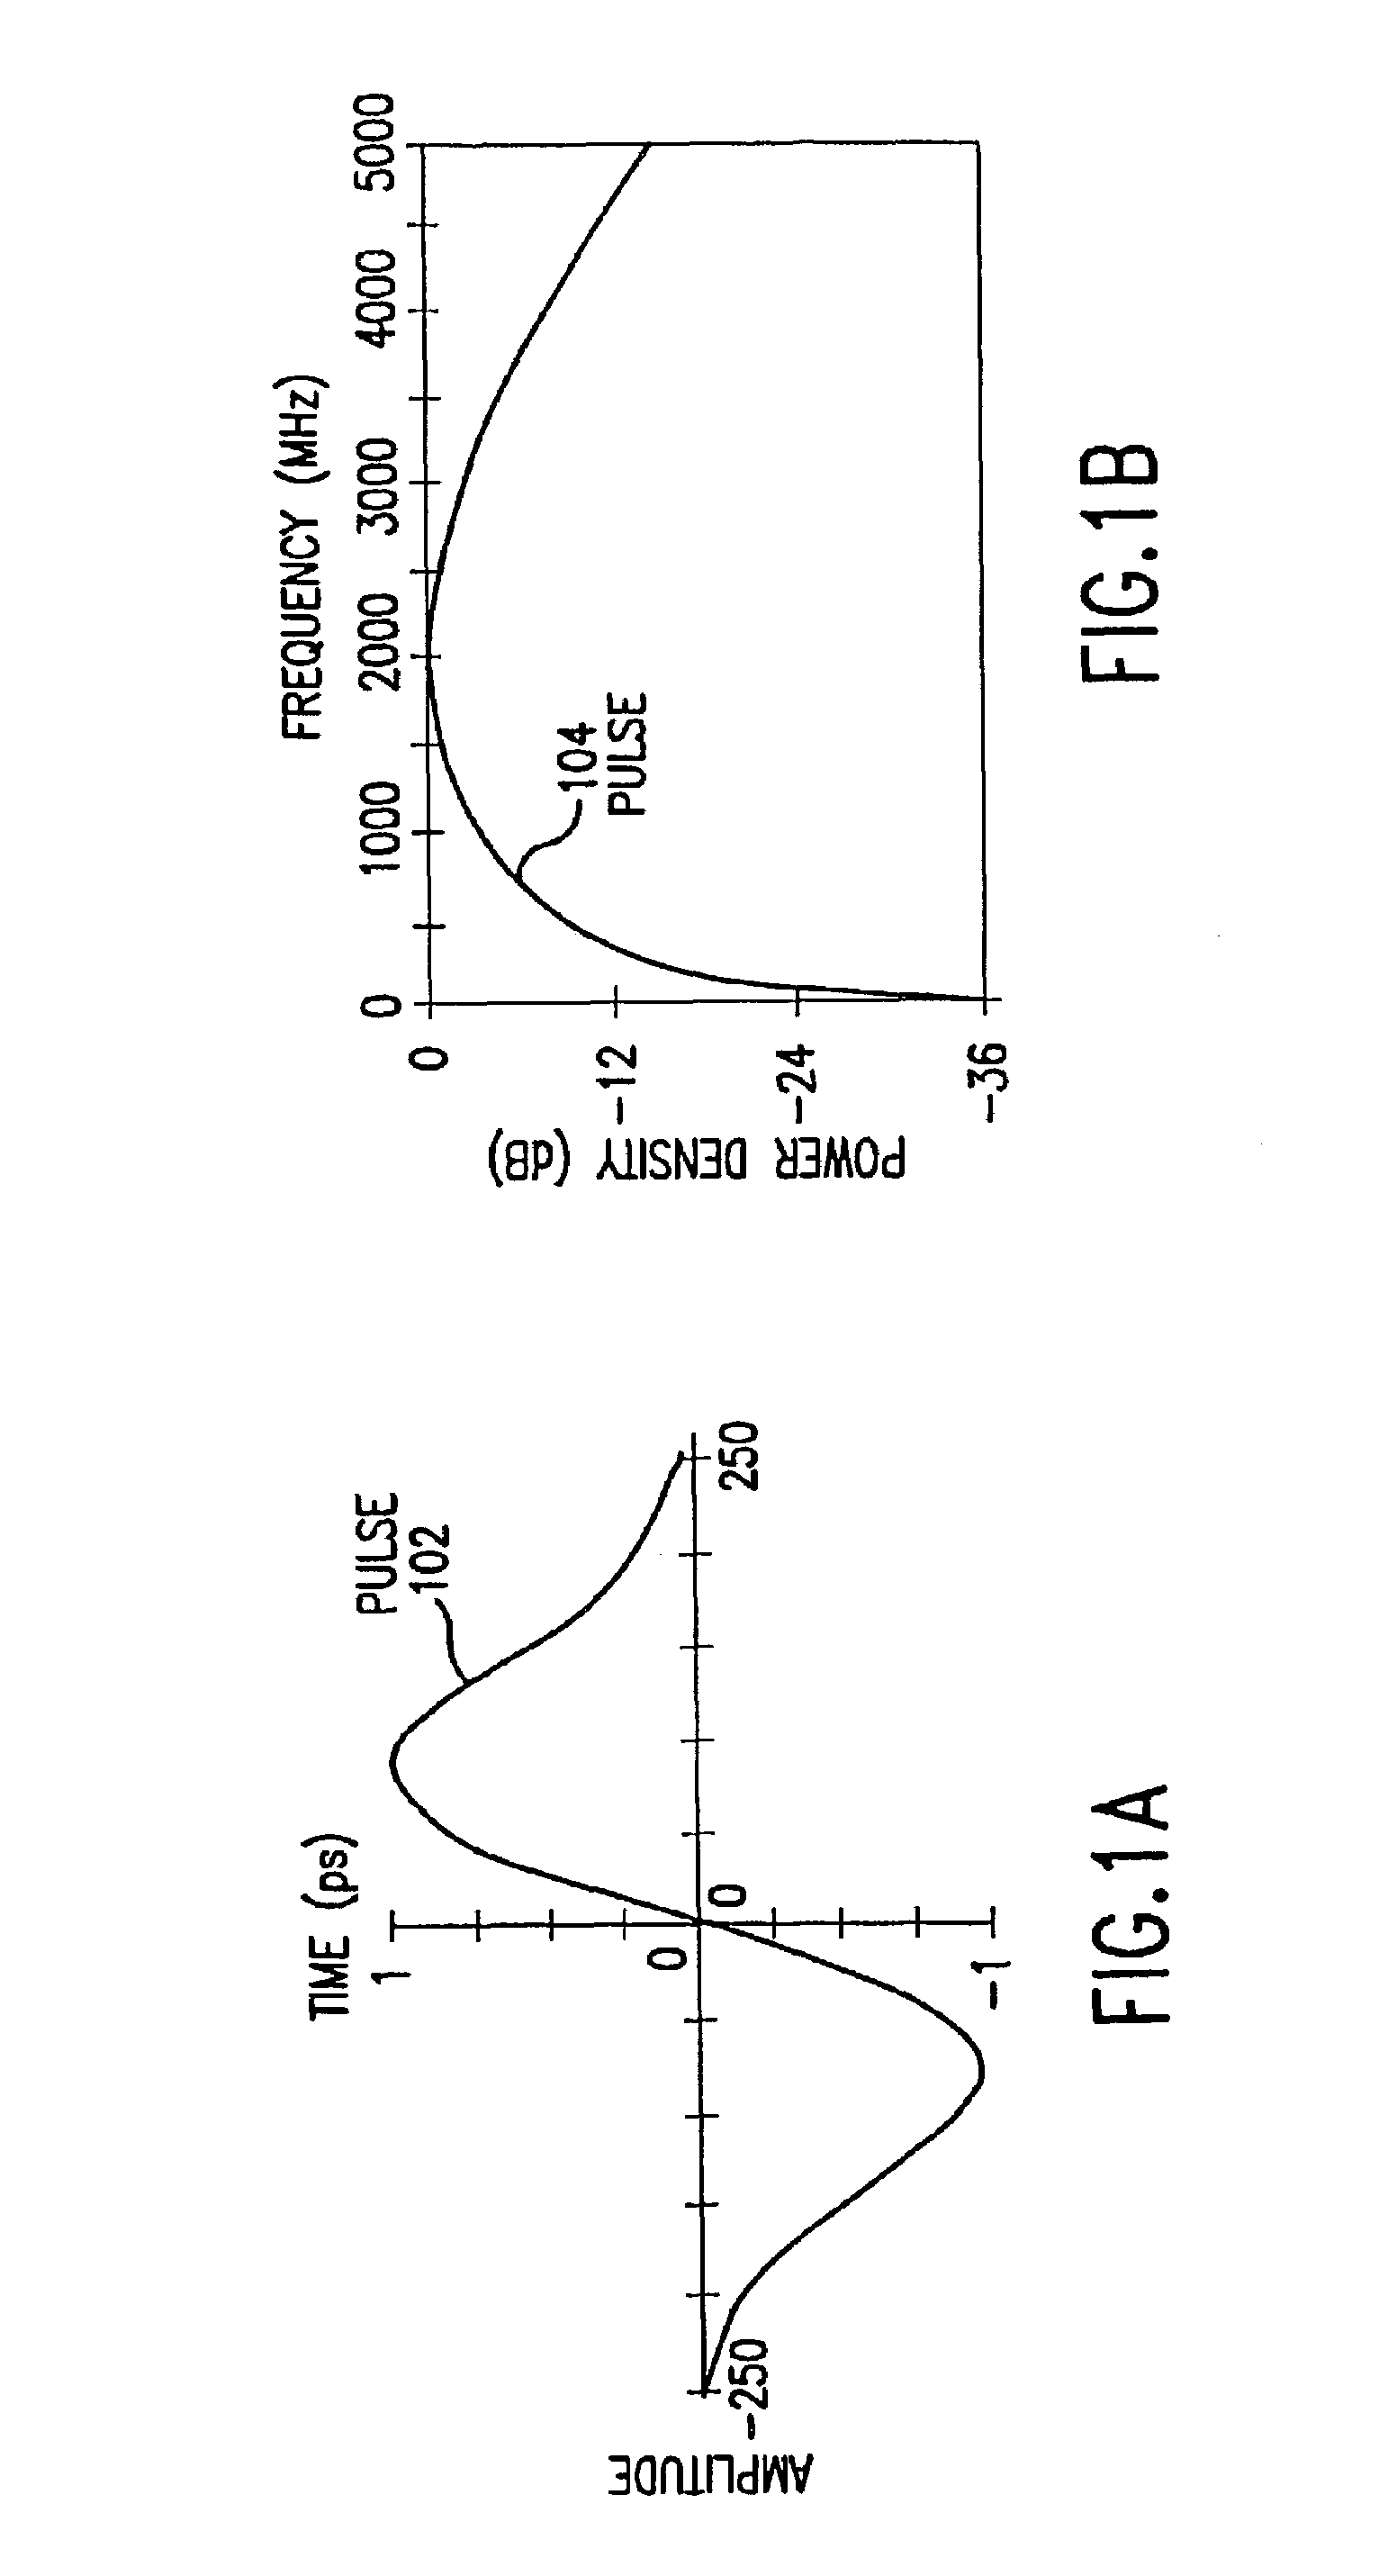 Method and transceiver for full duplex communication of ultra wideband signals